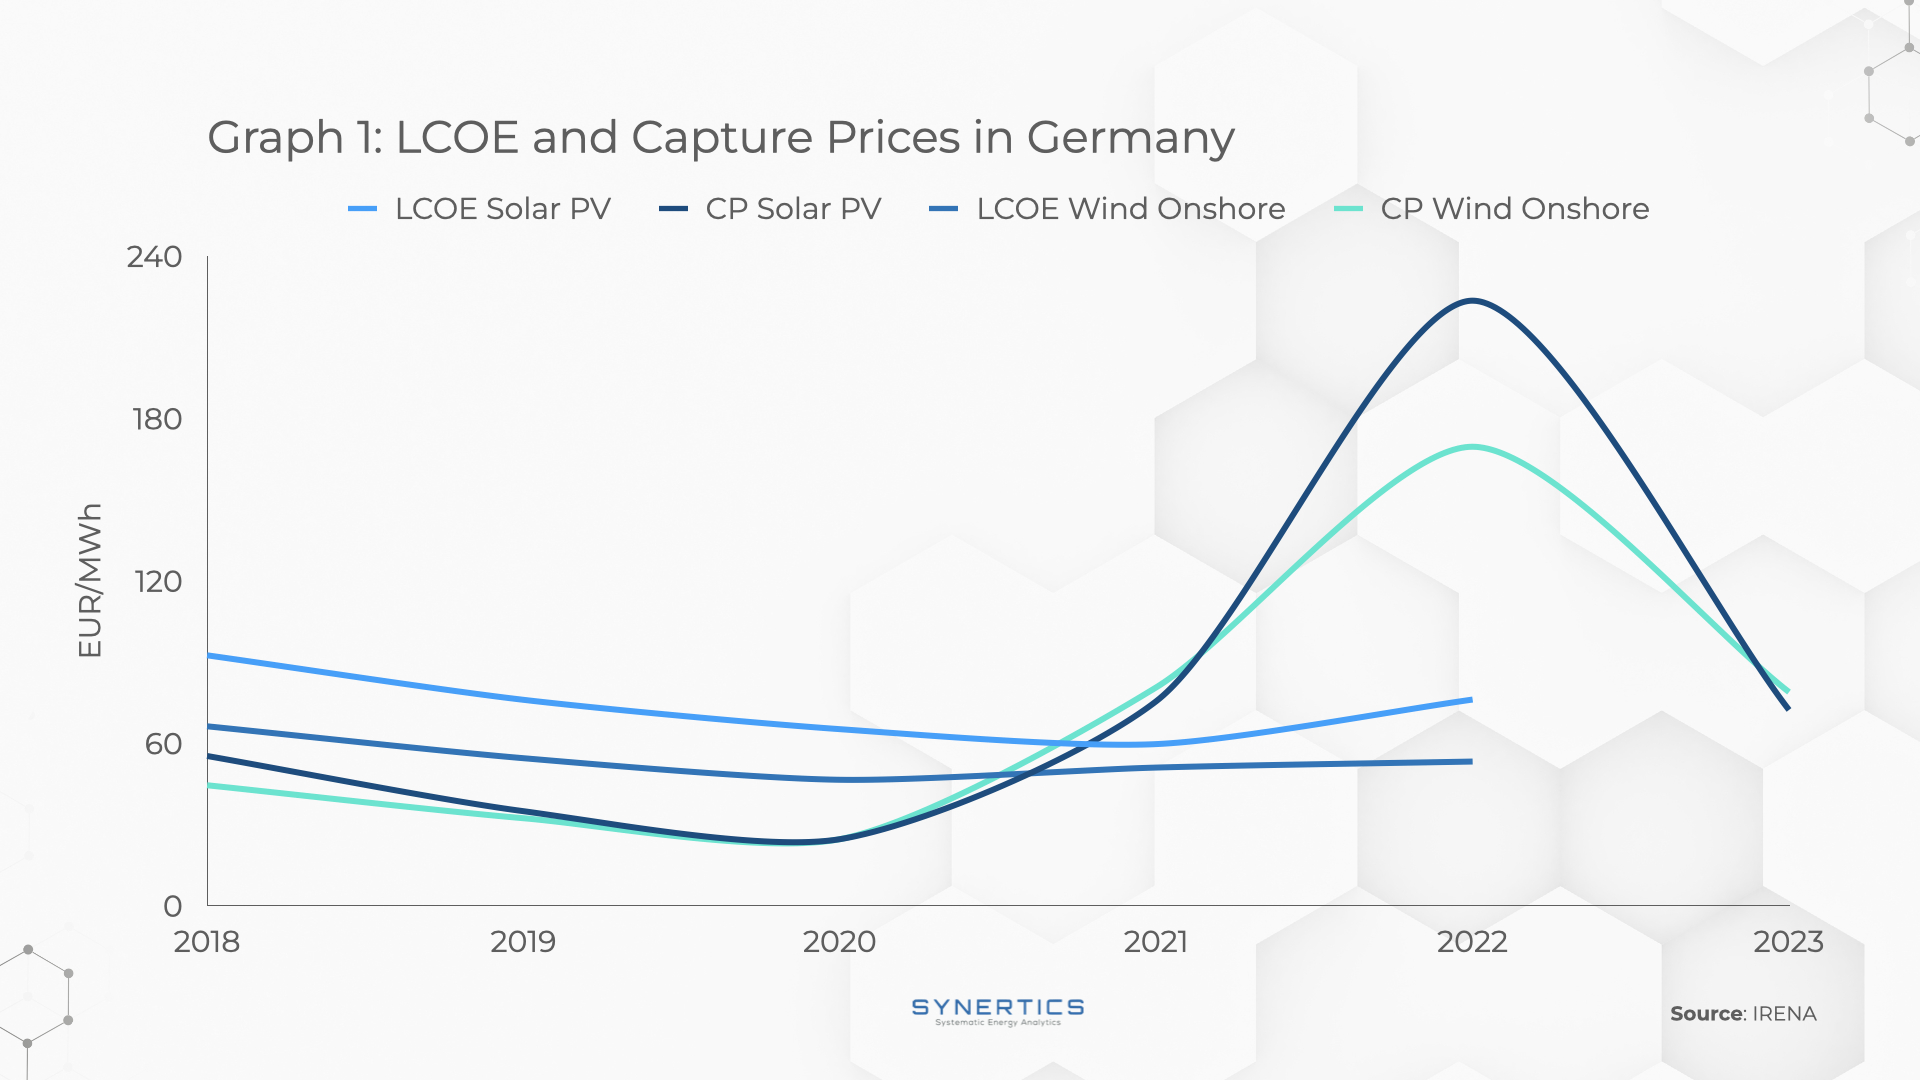 LCOE and Capture Prices in Germany